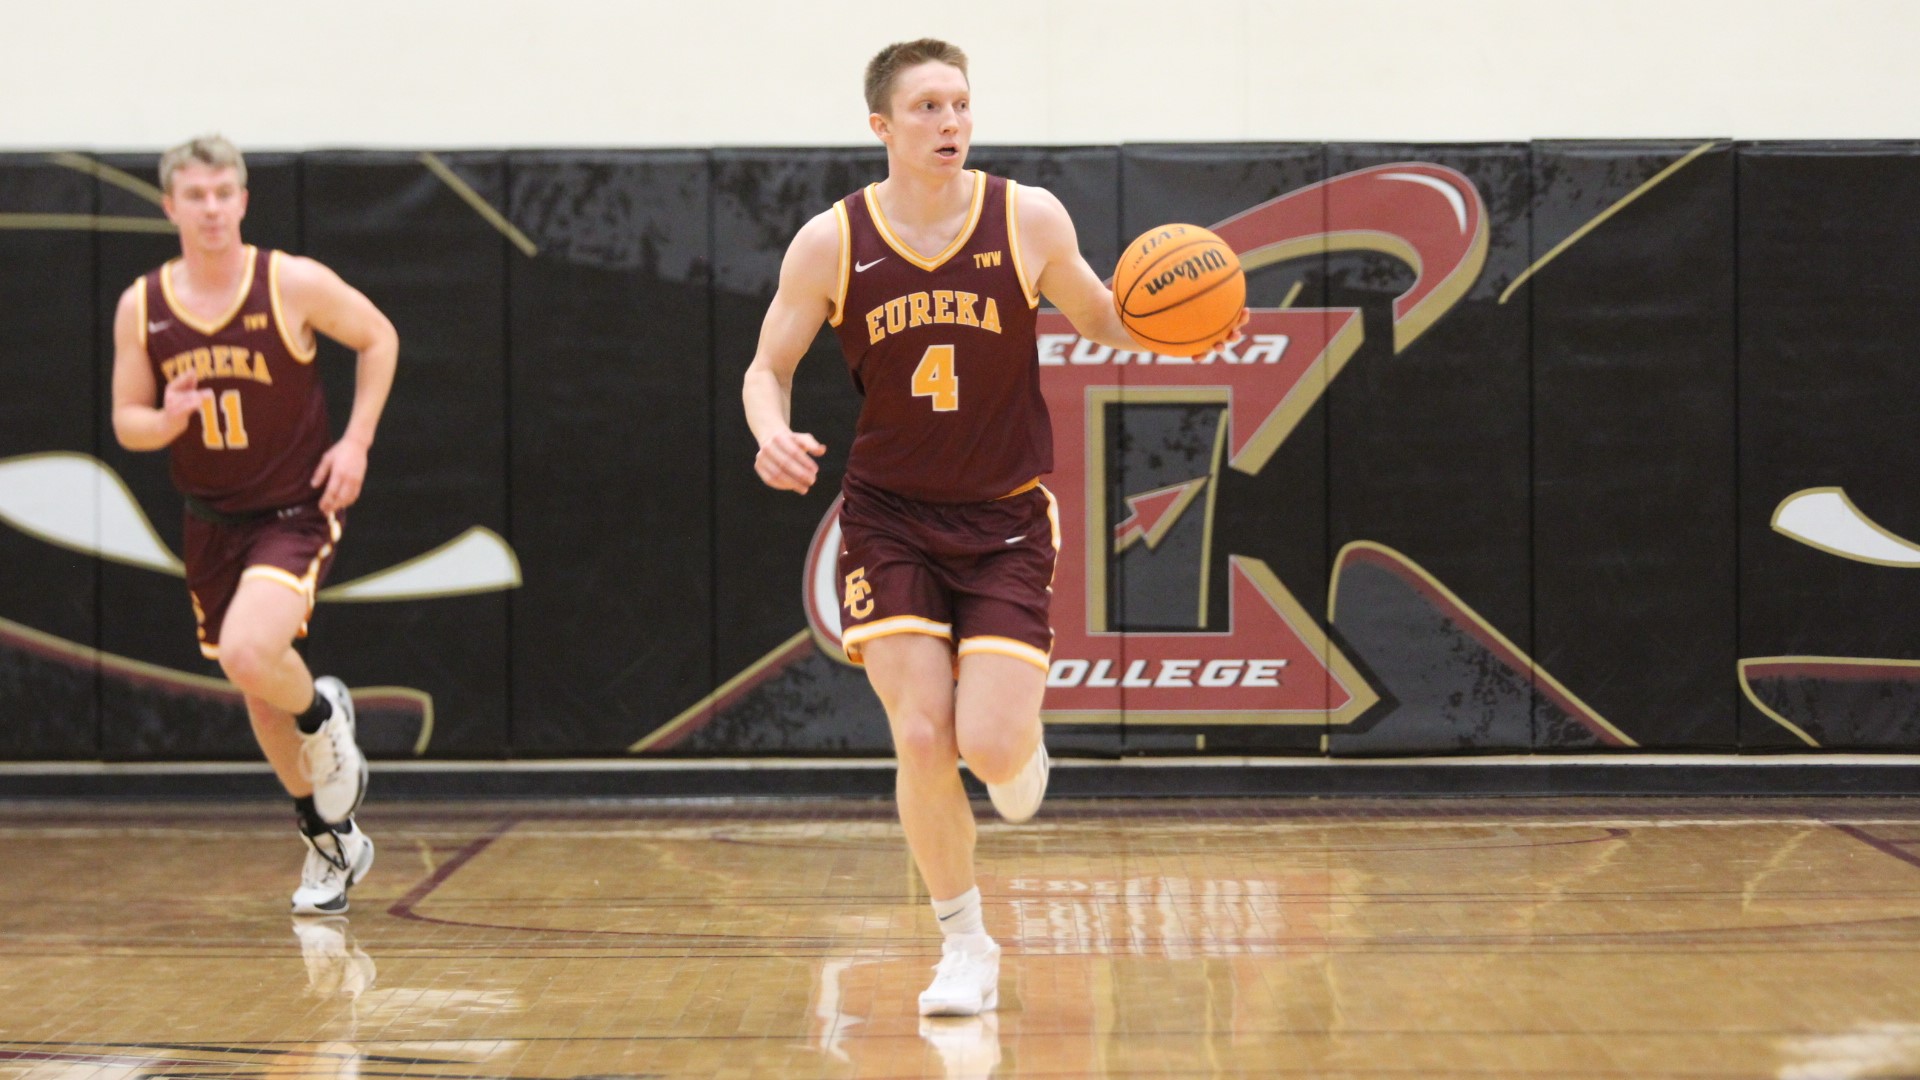 Carter and Brown Combine for 35 in Big Win Over Principia, 64-49.